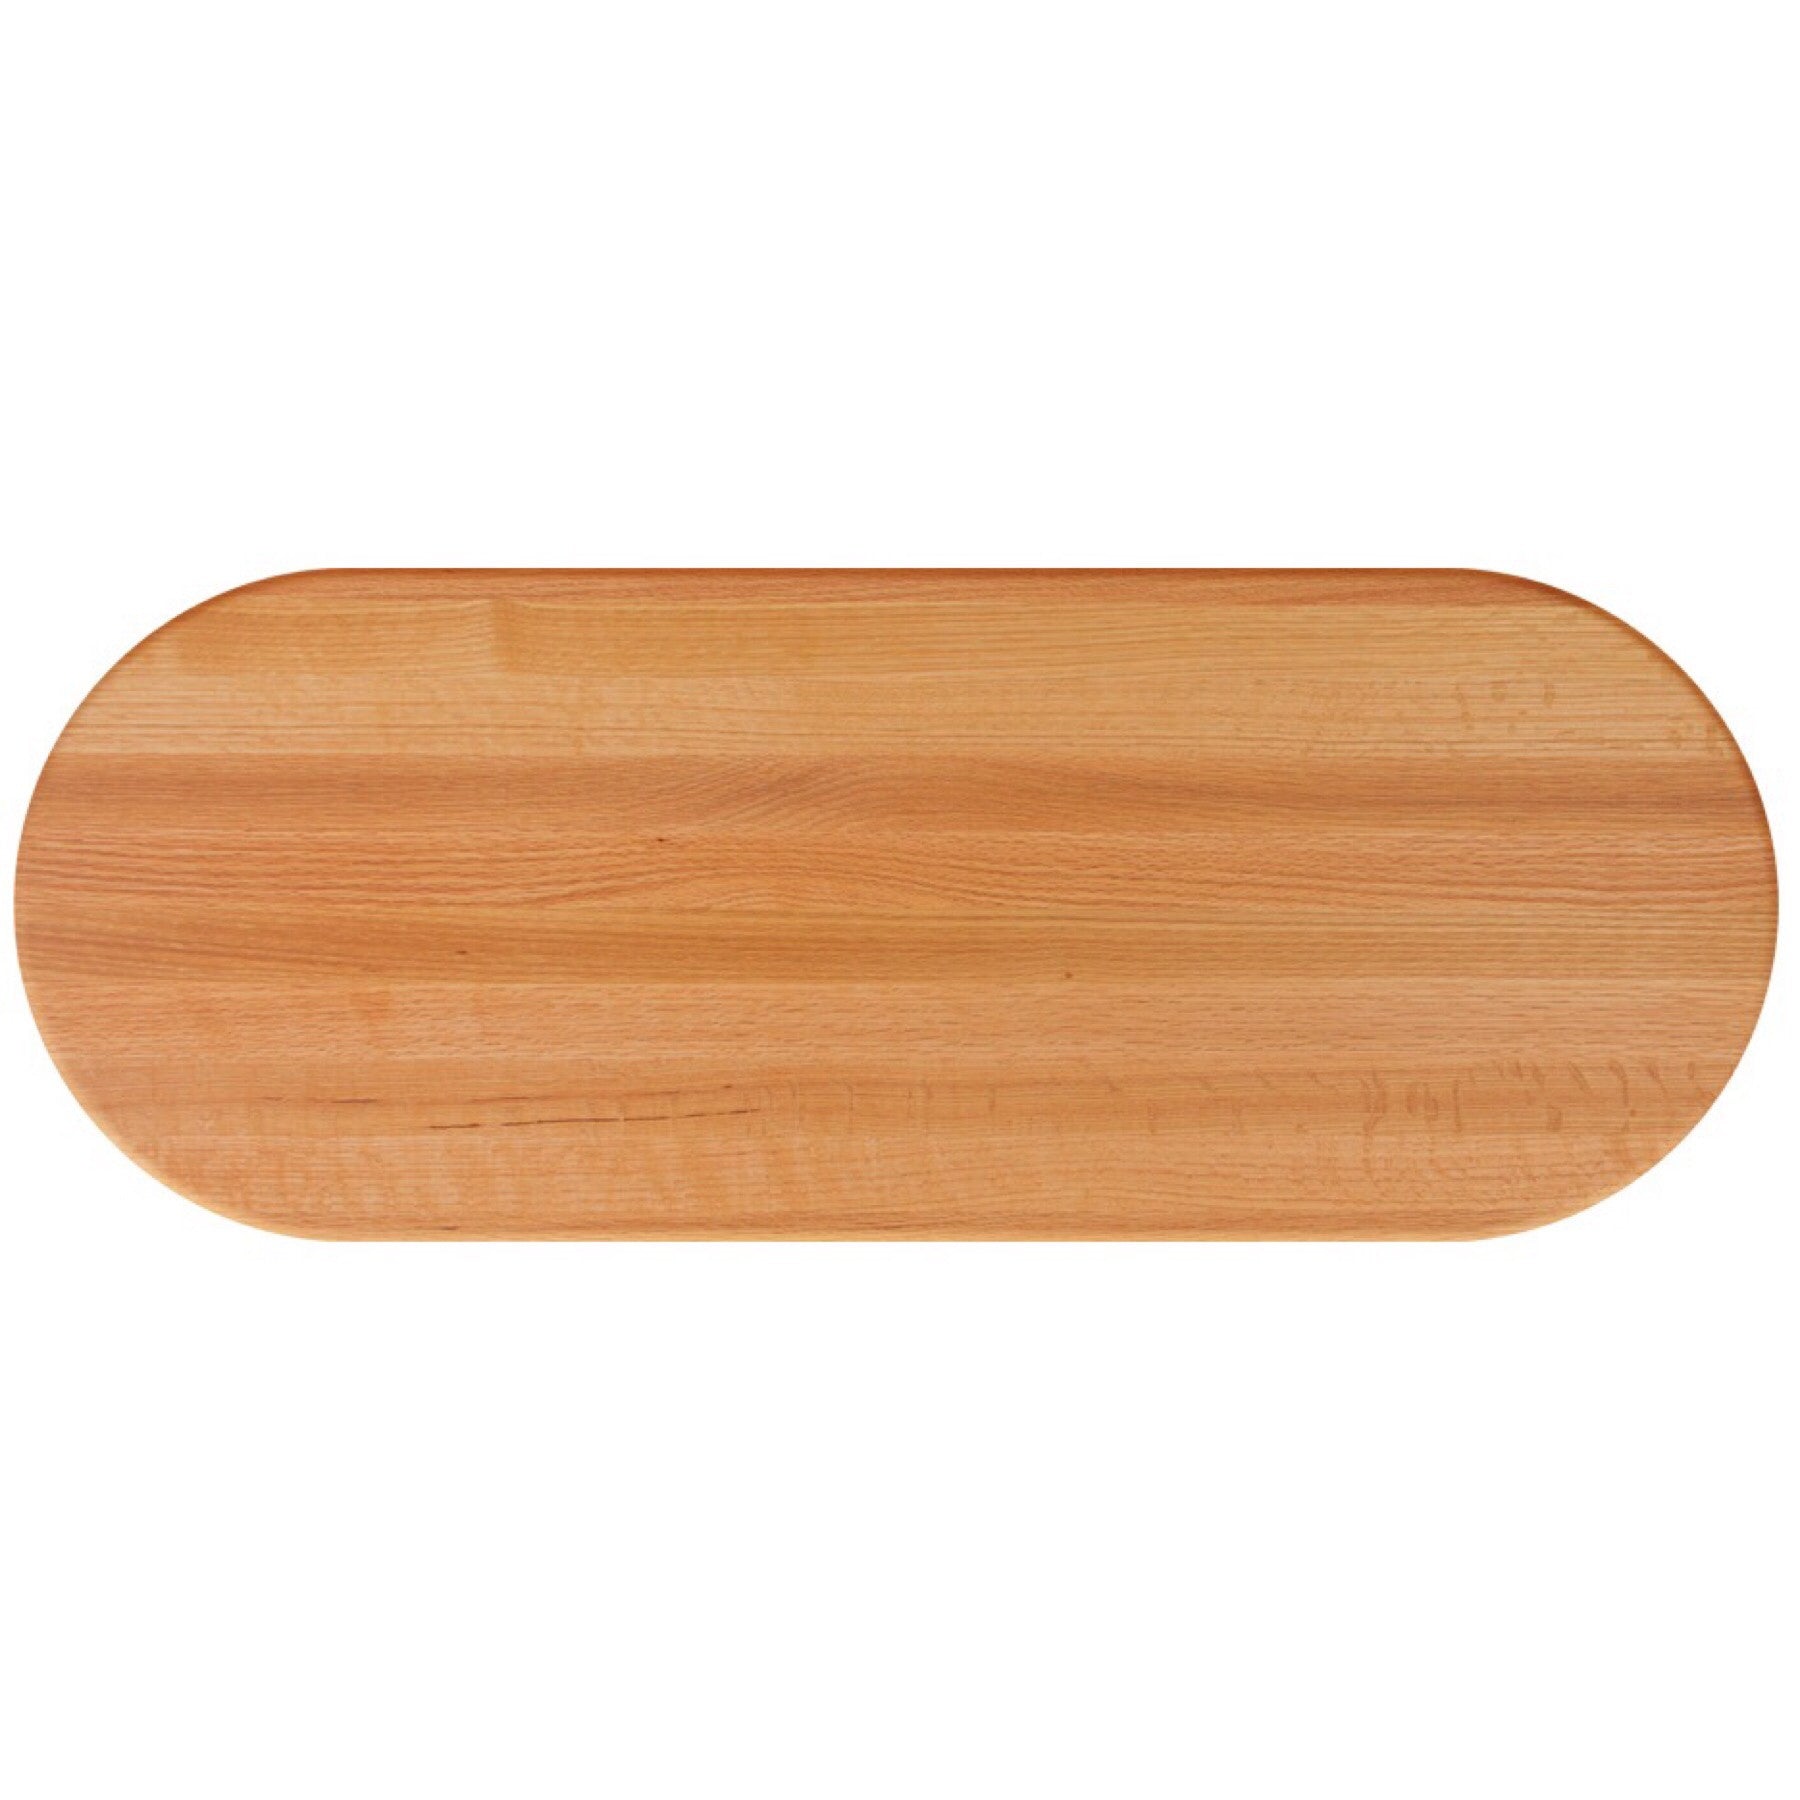 John Boos Oval RTO Red Oak Butcher Block Table Top - Stainable